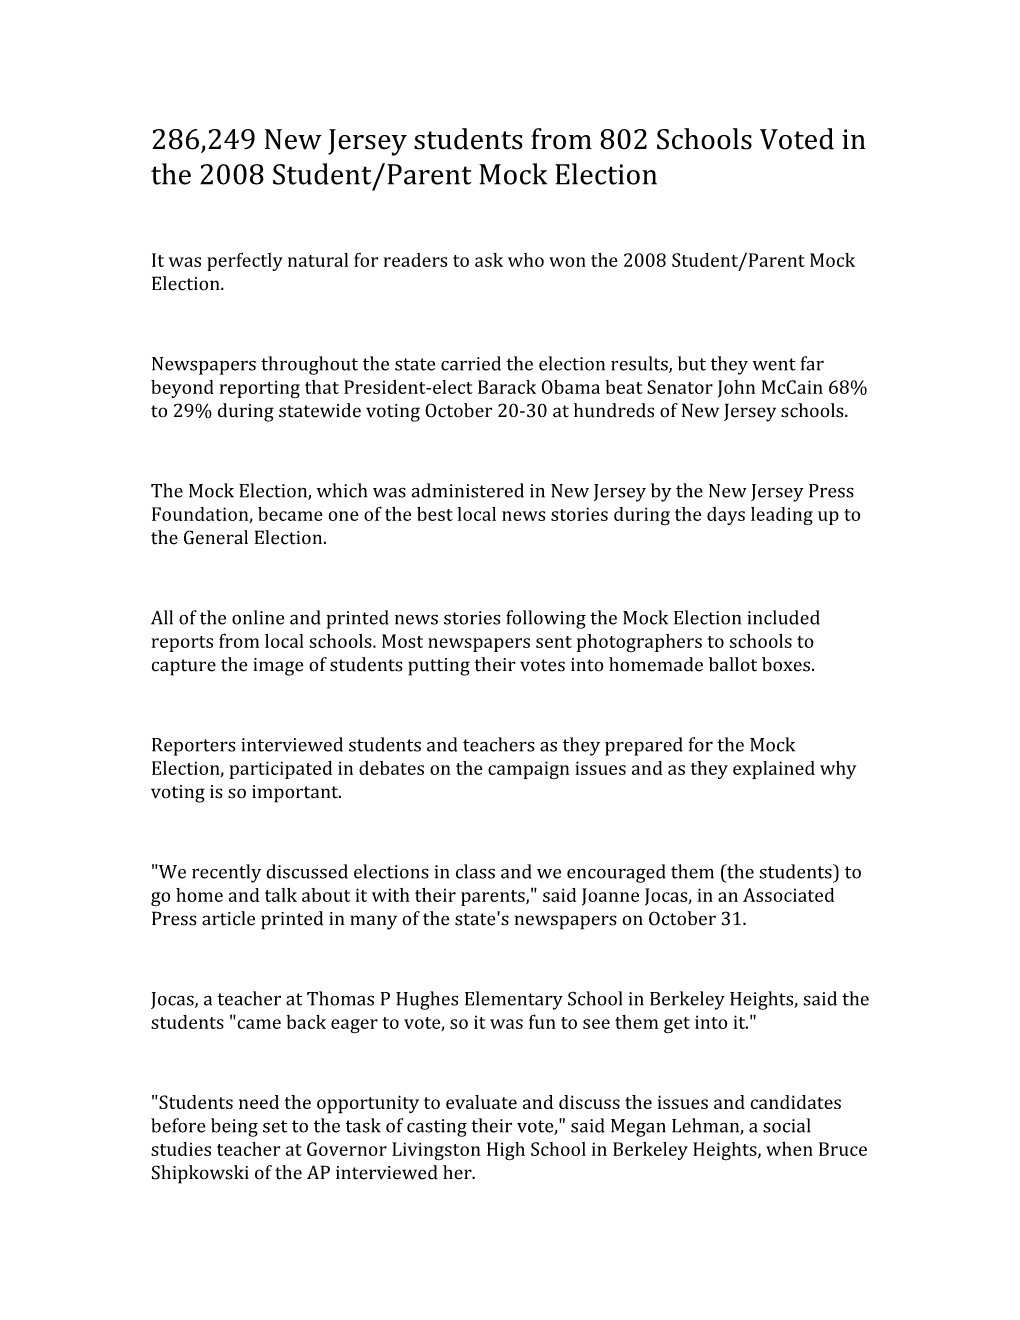 286,249 New Jersey Students from 802 Schools Voted in the 2008 Student/Parent Mock Election